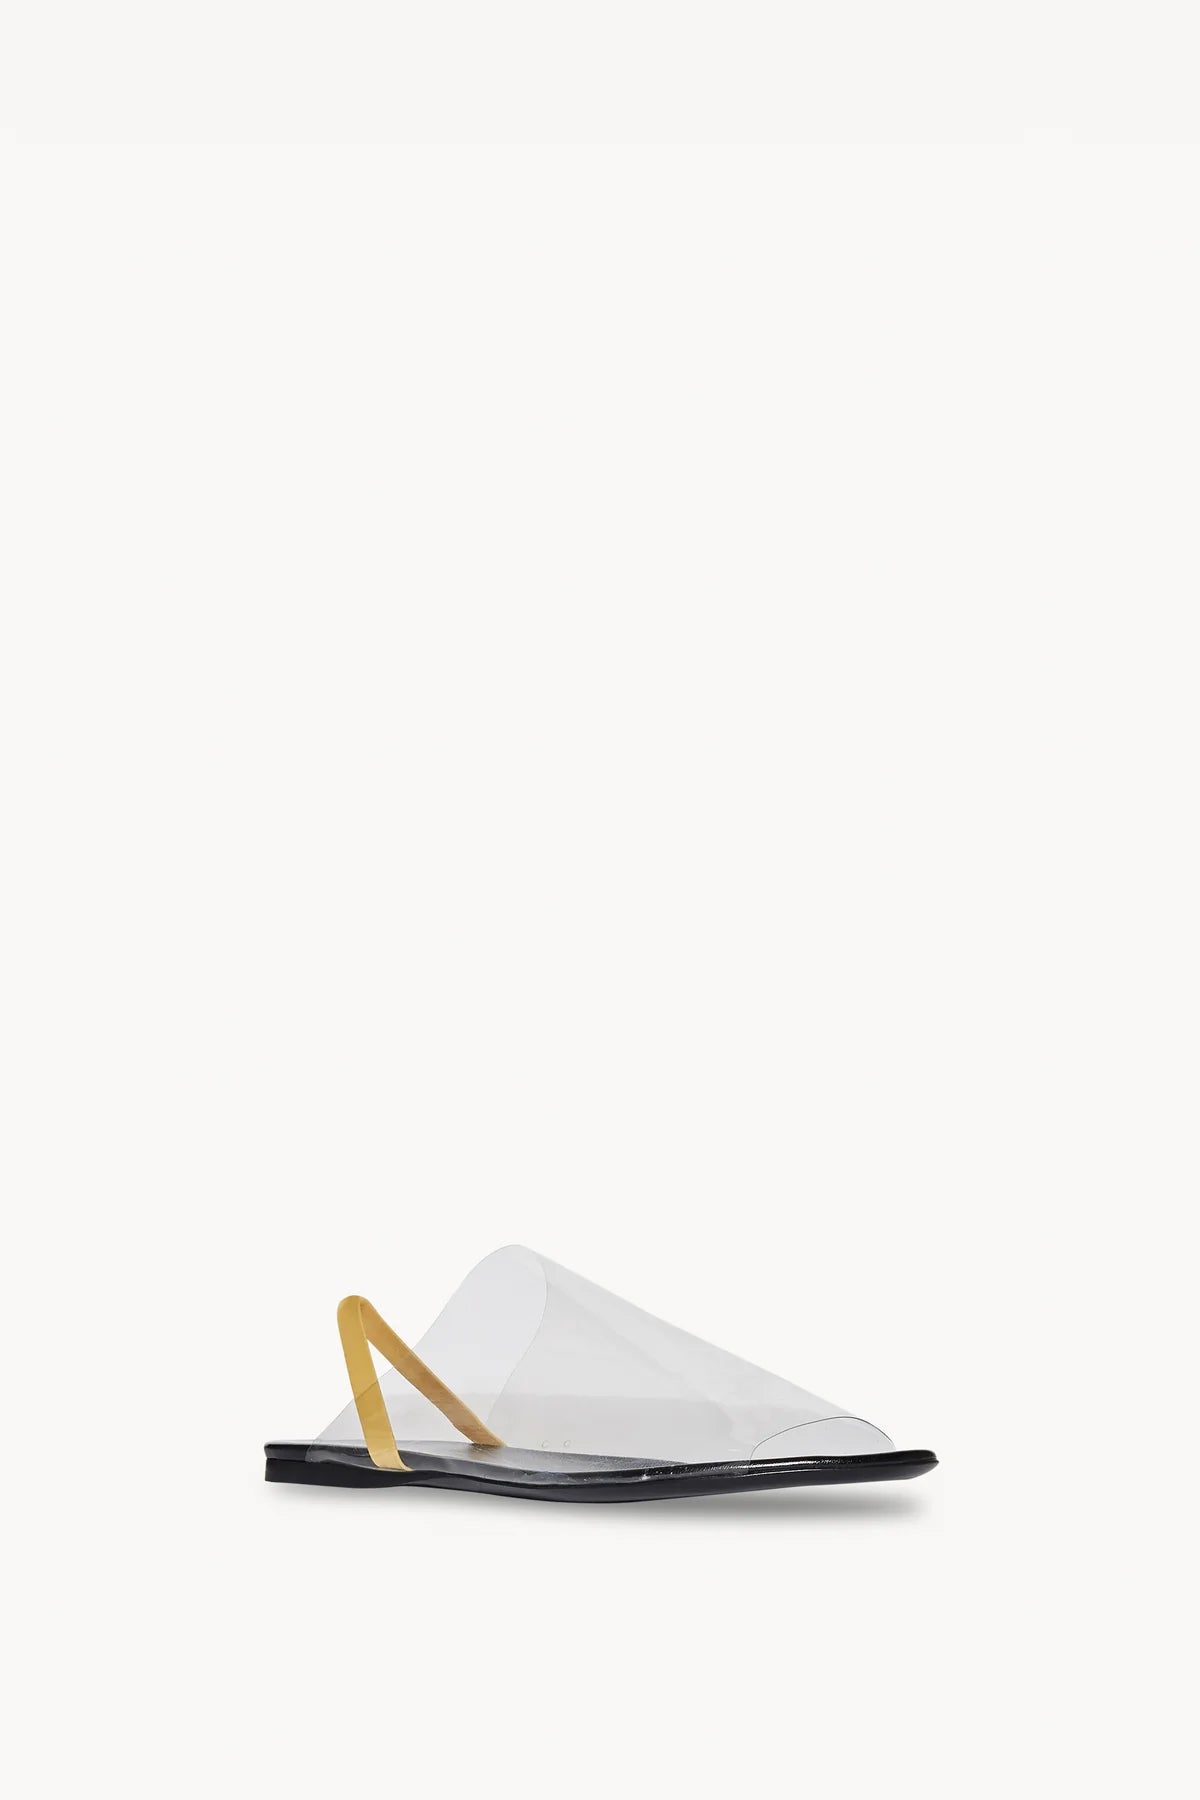 the-row-clear-sandal-amarees